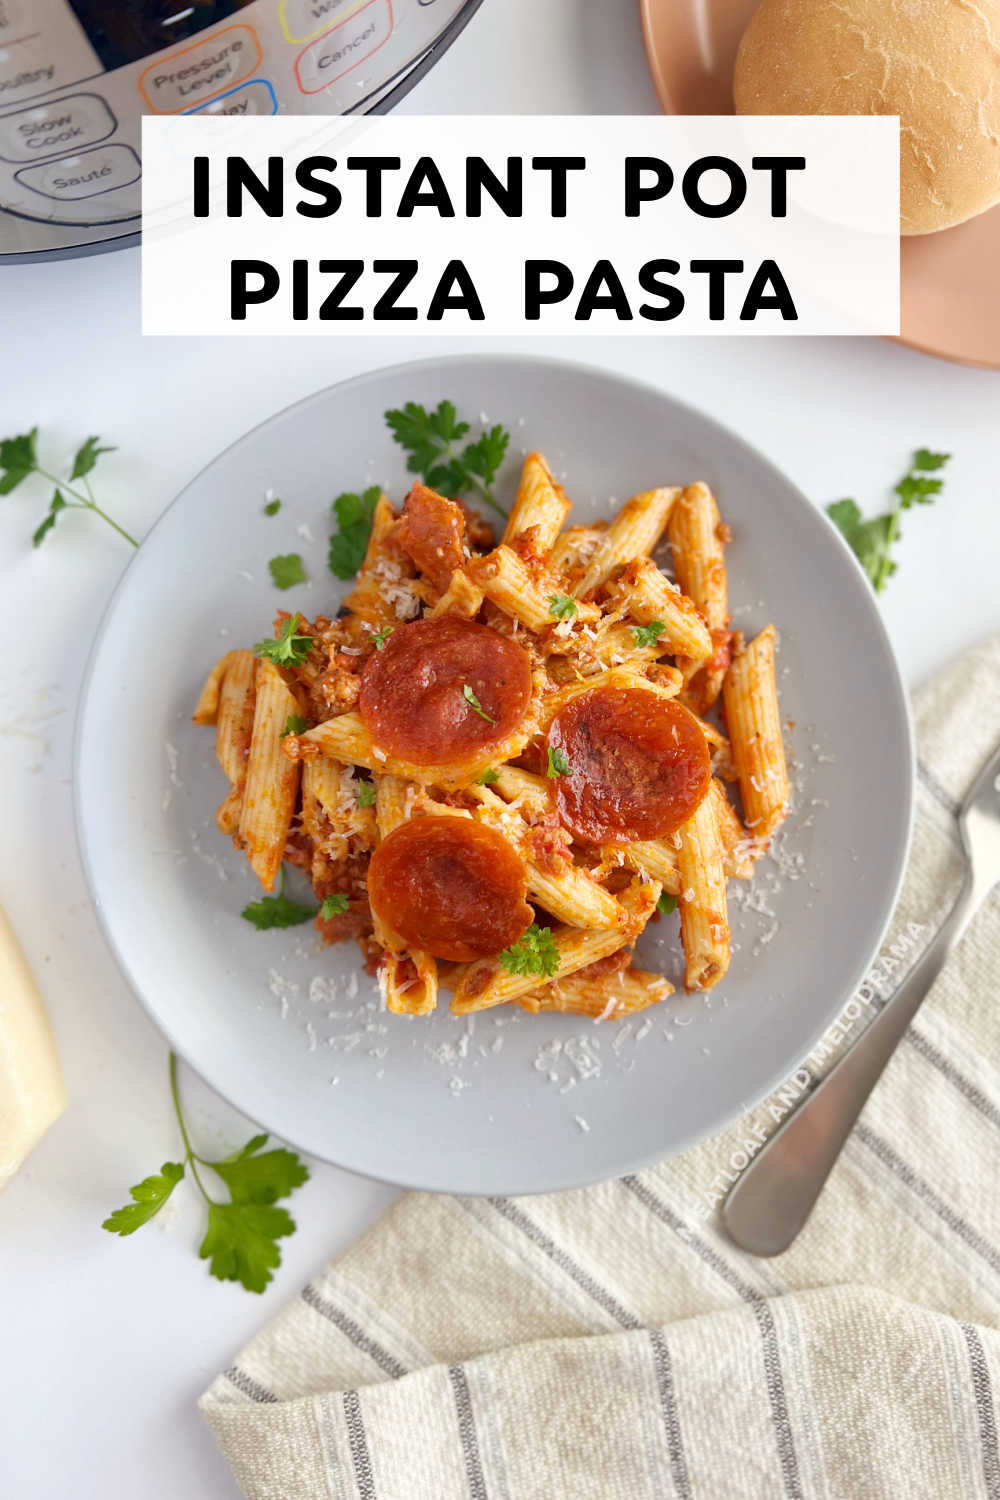 Instant Pot Pizza Pasta is an easy recipe made with penne pasta, sausage, pepperoni and your favorite pizza toppings. Ready in 30 minutes! Your whole family will love this kid friendly dinner! via @meamel